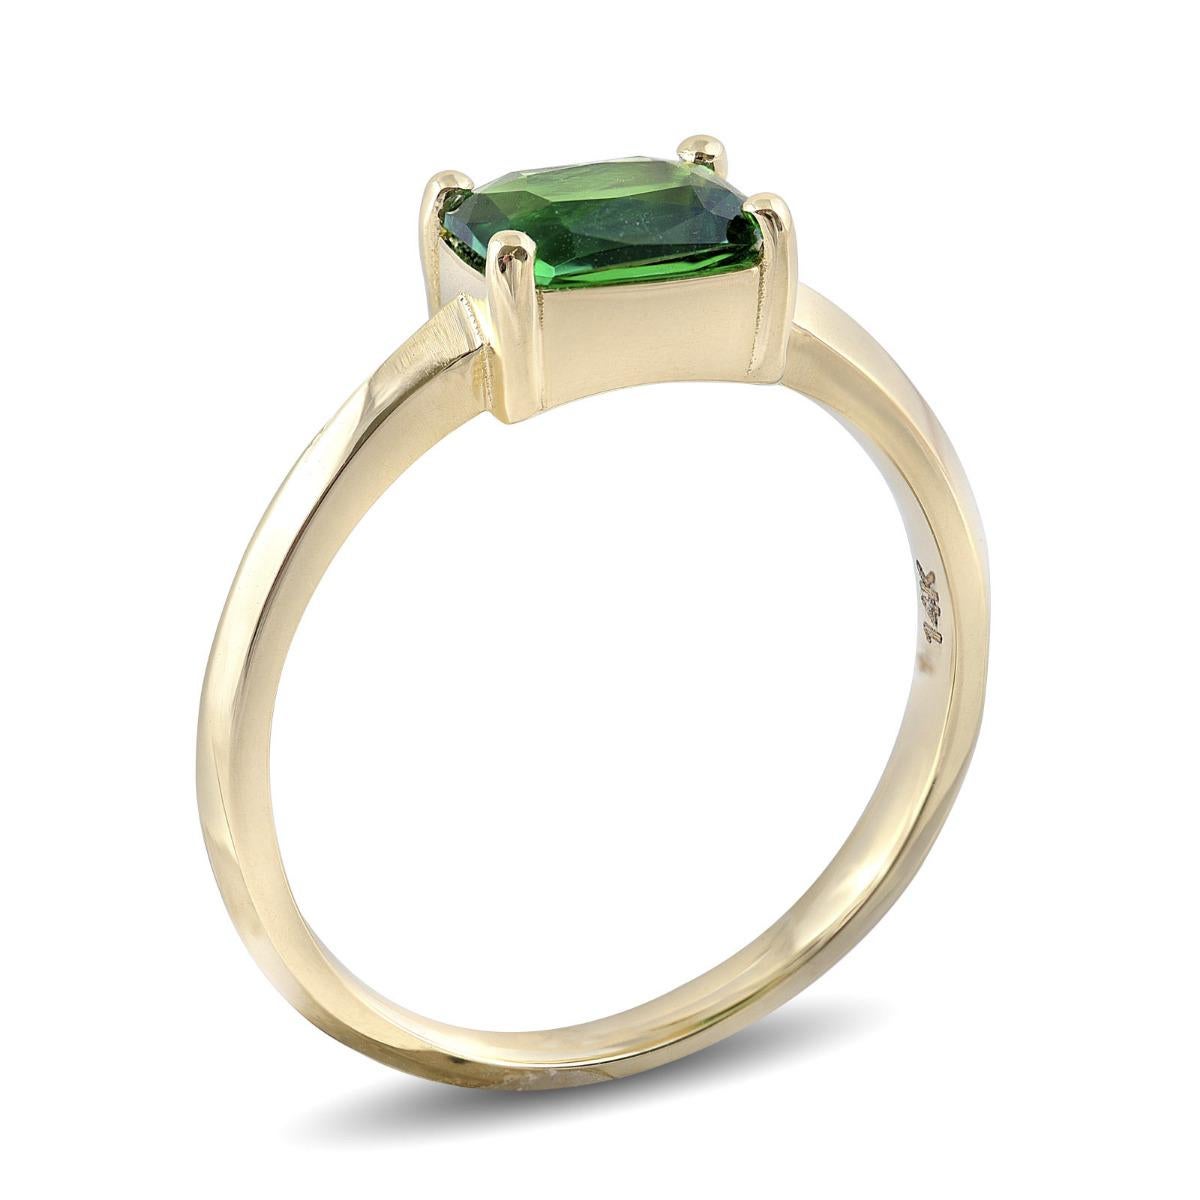 This spring colored Tsavorite is as spectacular as this gem gets. Cut as an octagon, weighing 1.11 carats, it rests perfectly on the finger. Prong set, in 14K yellow gold; this ring is great to have when popping the big question.

Ring